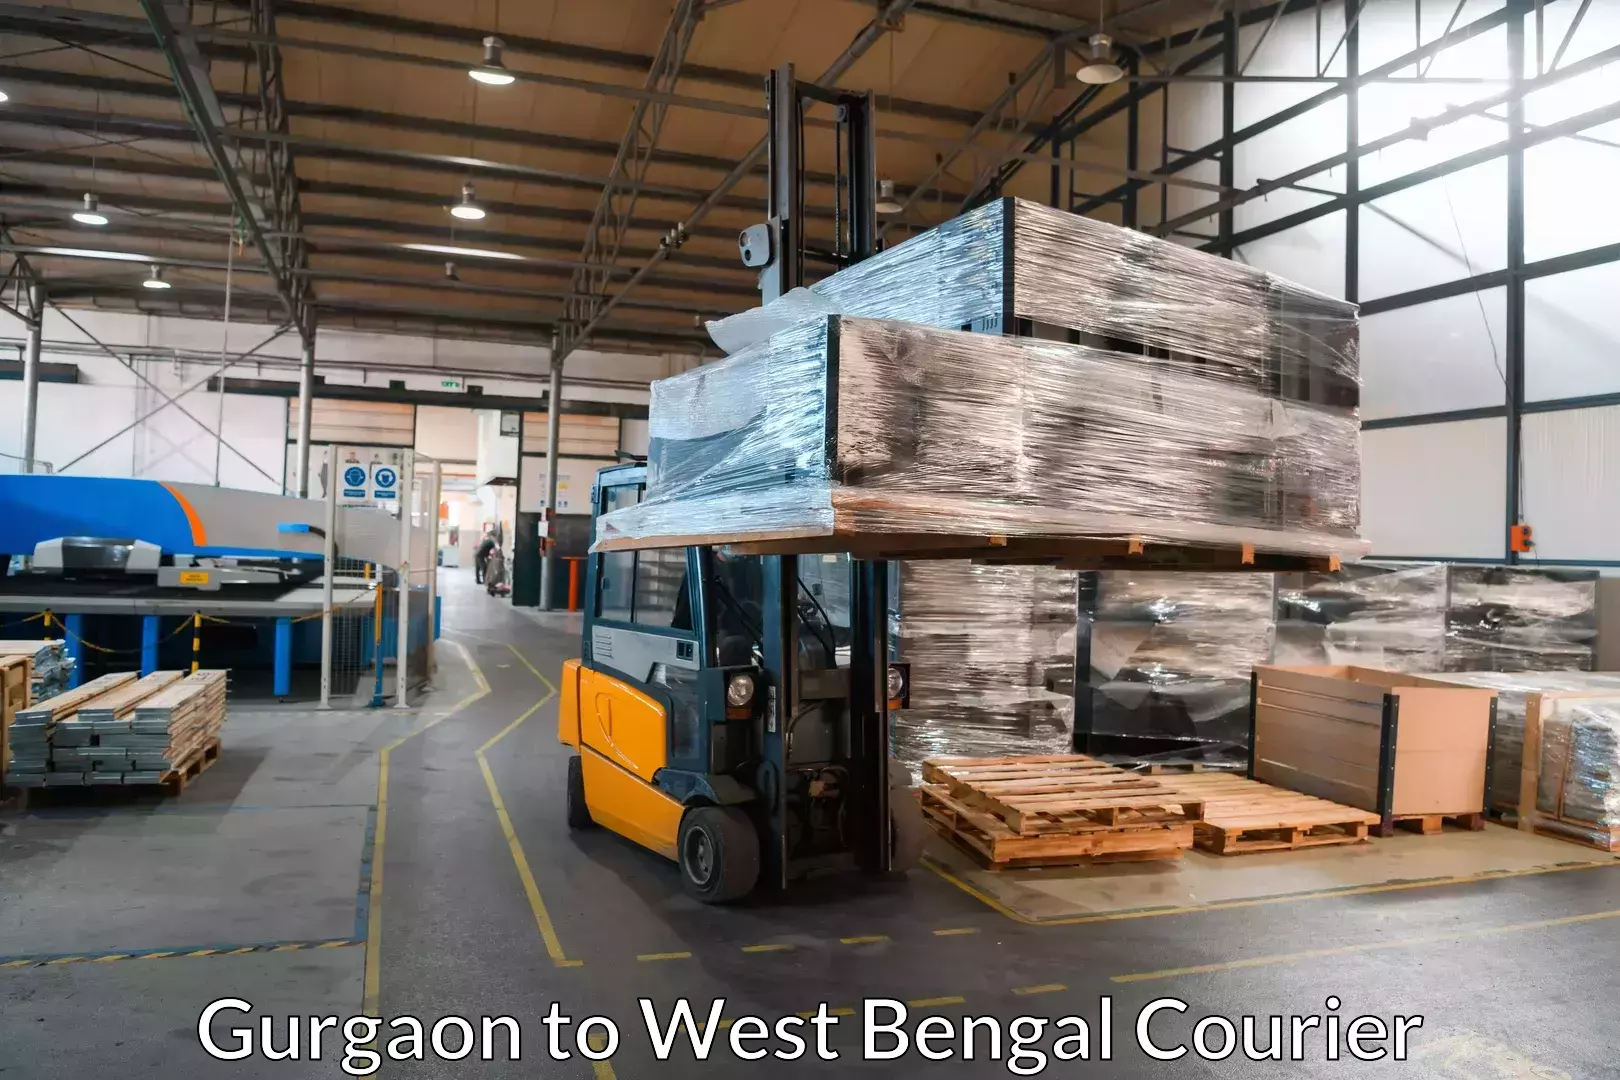 Furniture delivery service Gurgaon to West Bengal